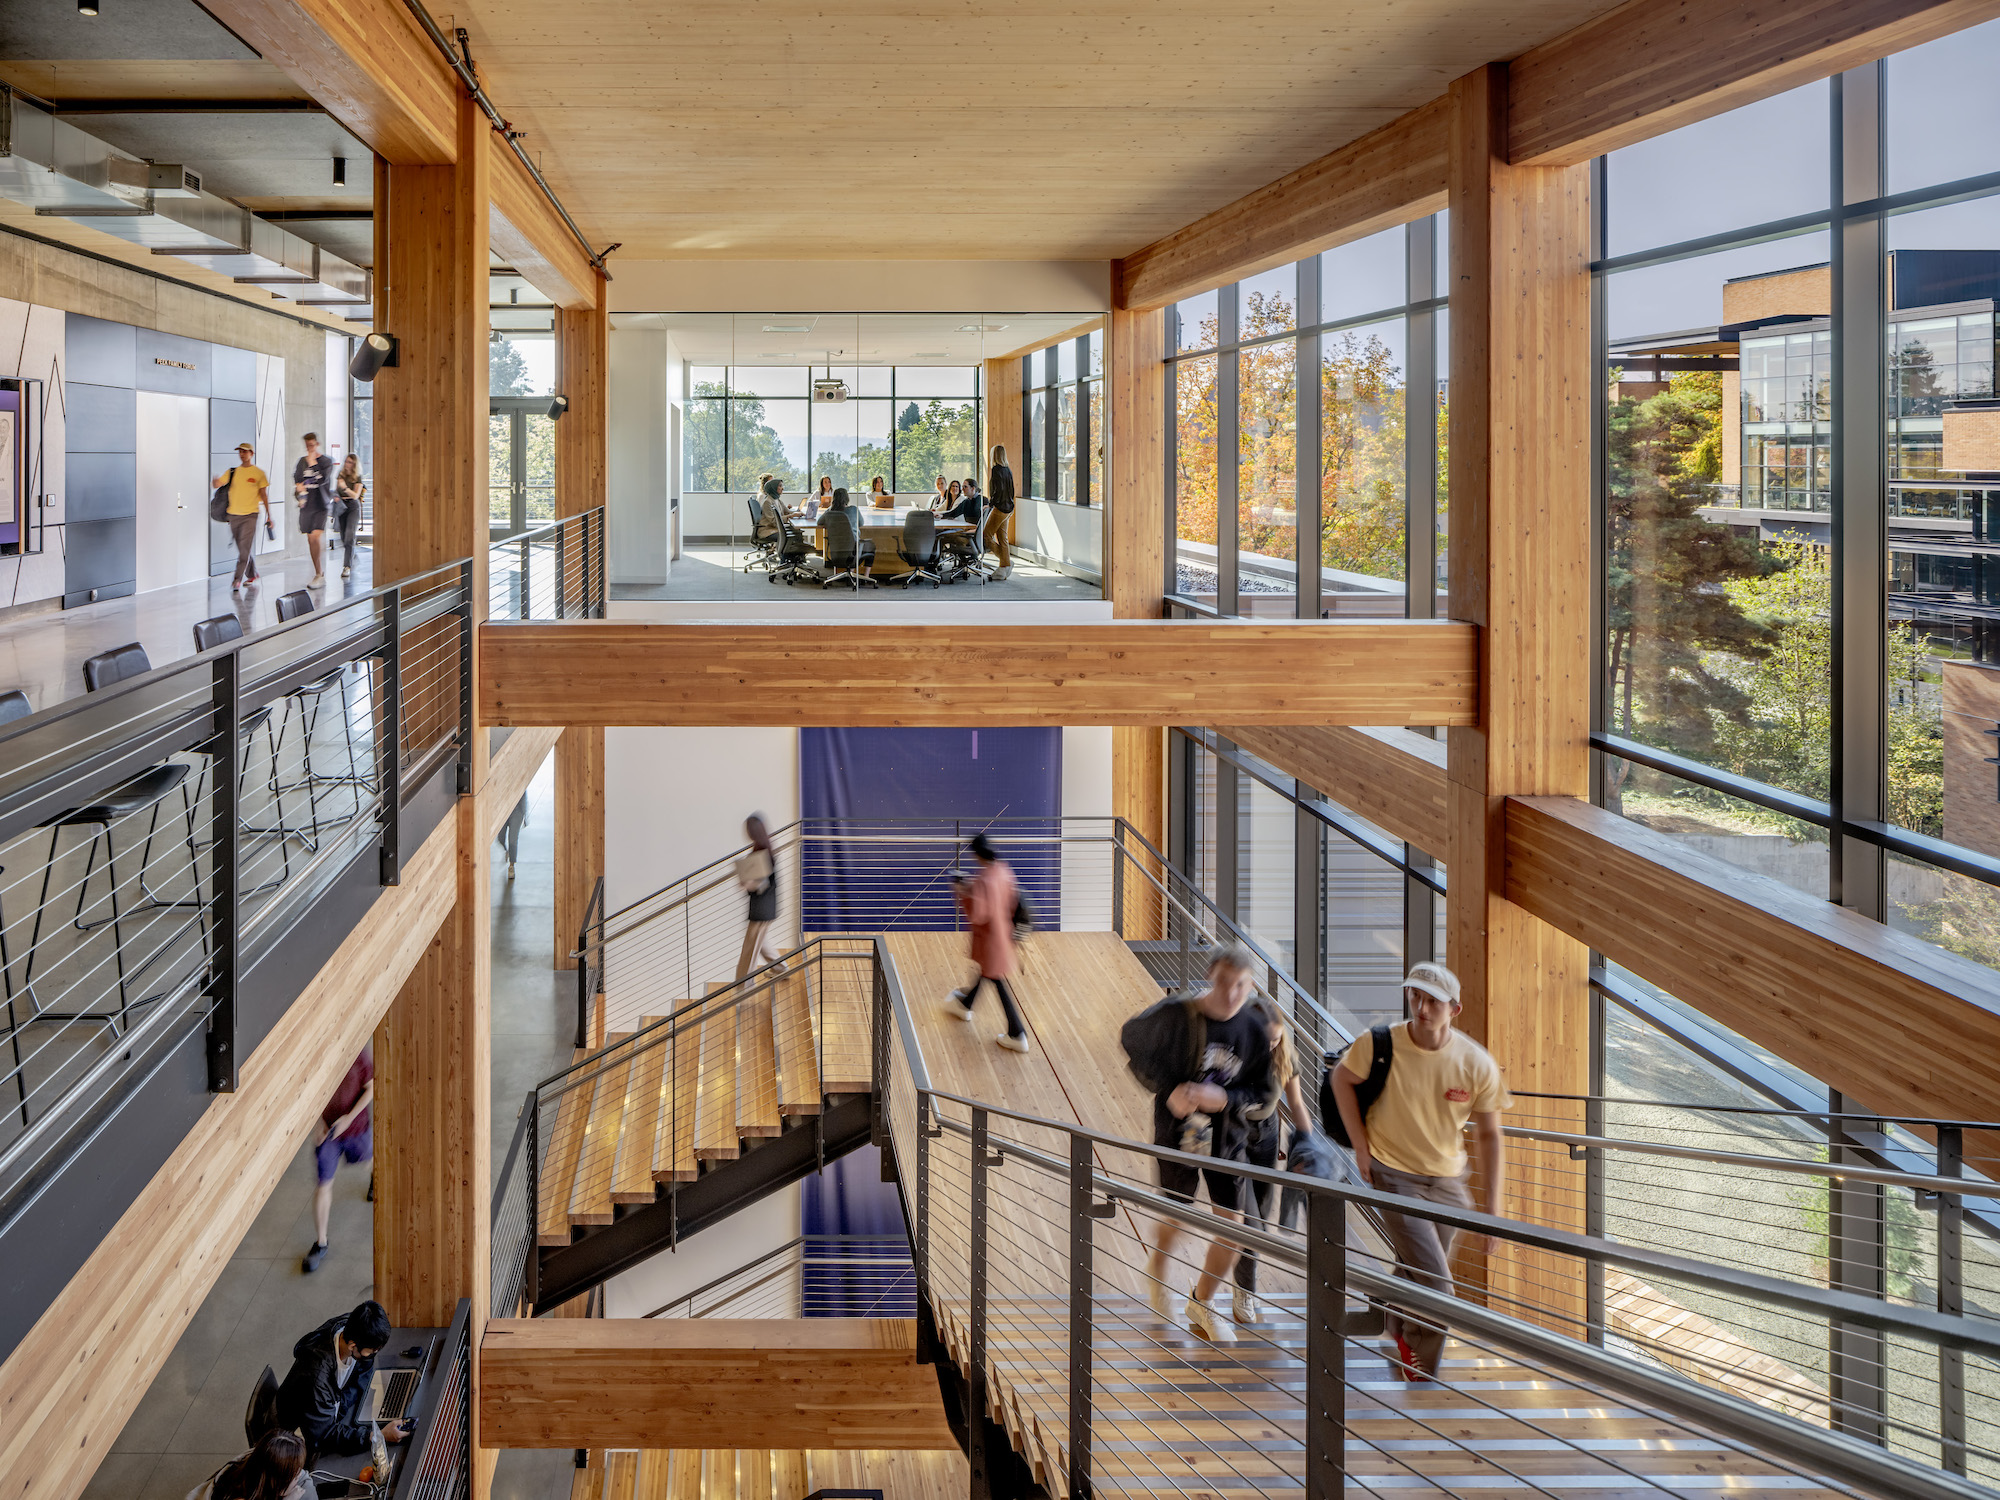 LMN Architects designed the mass timber Michael G. Foster School of Business Founders Hall at the University of Washington